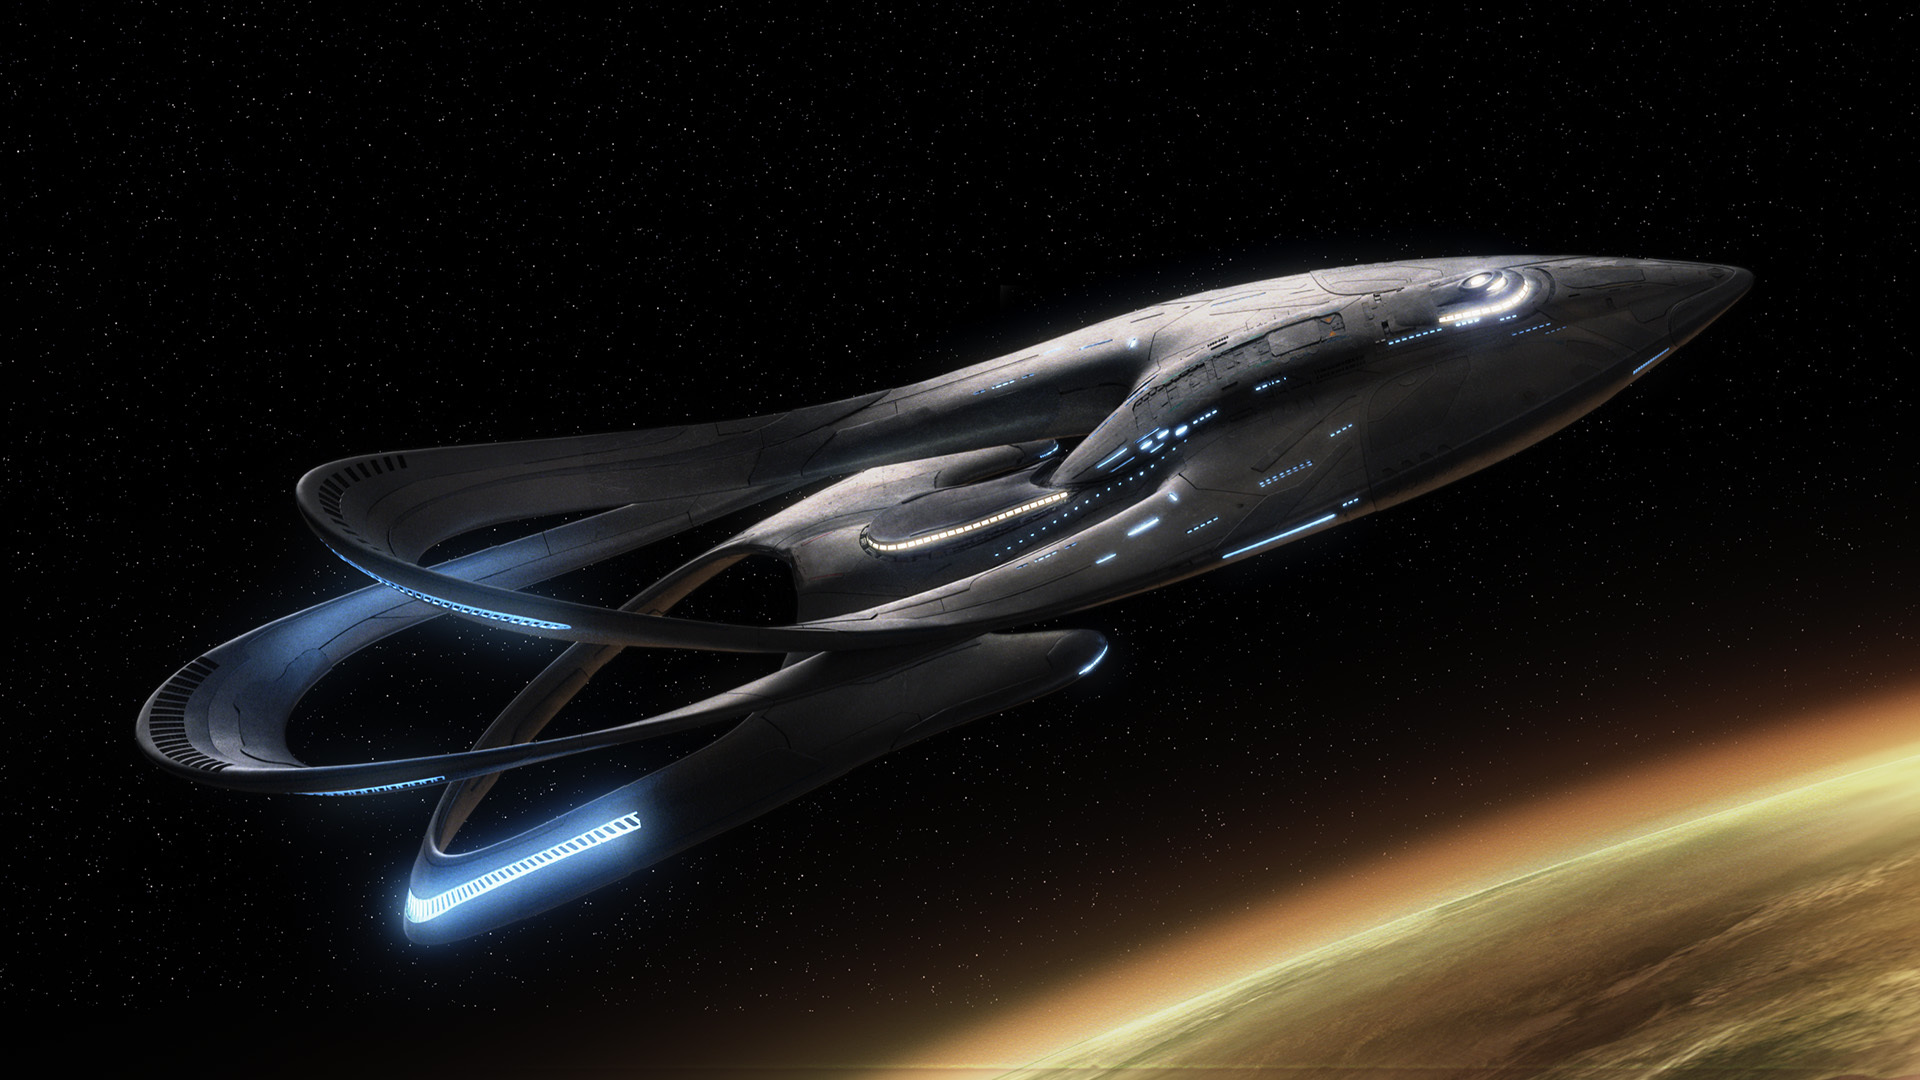 The Orville Ship